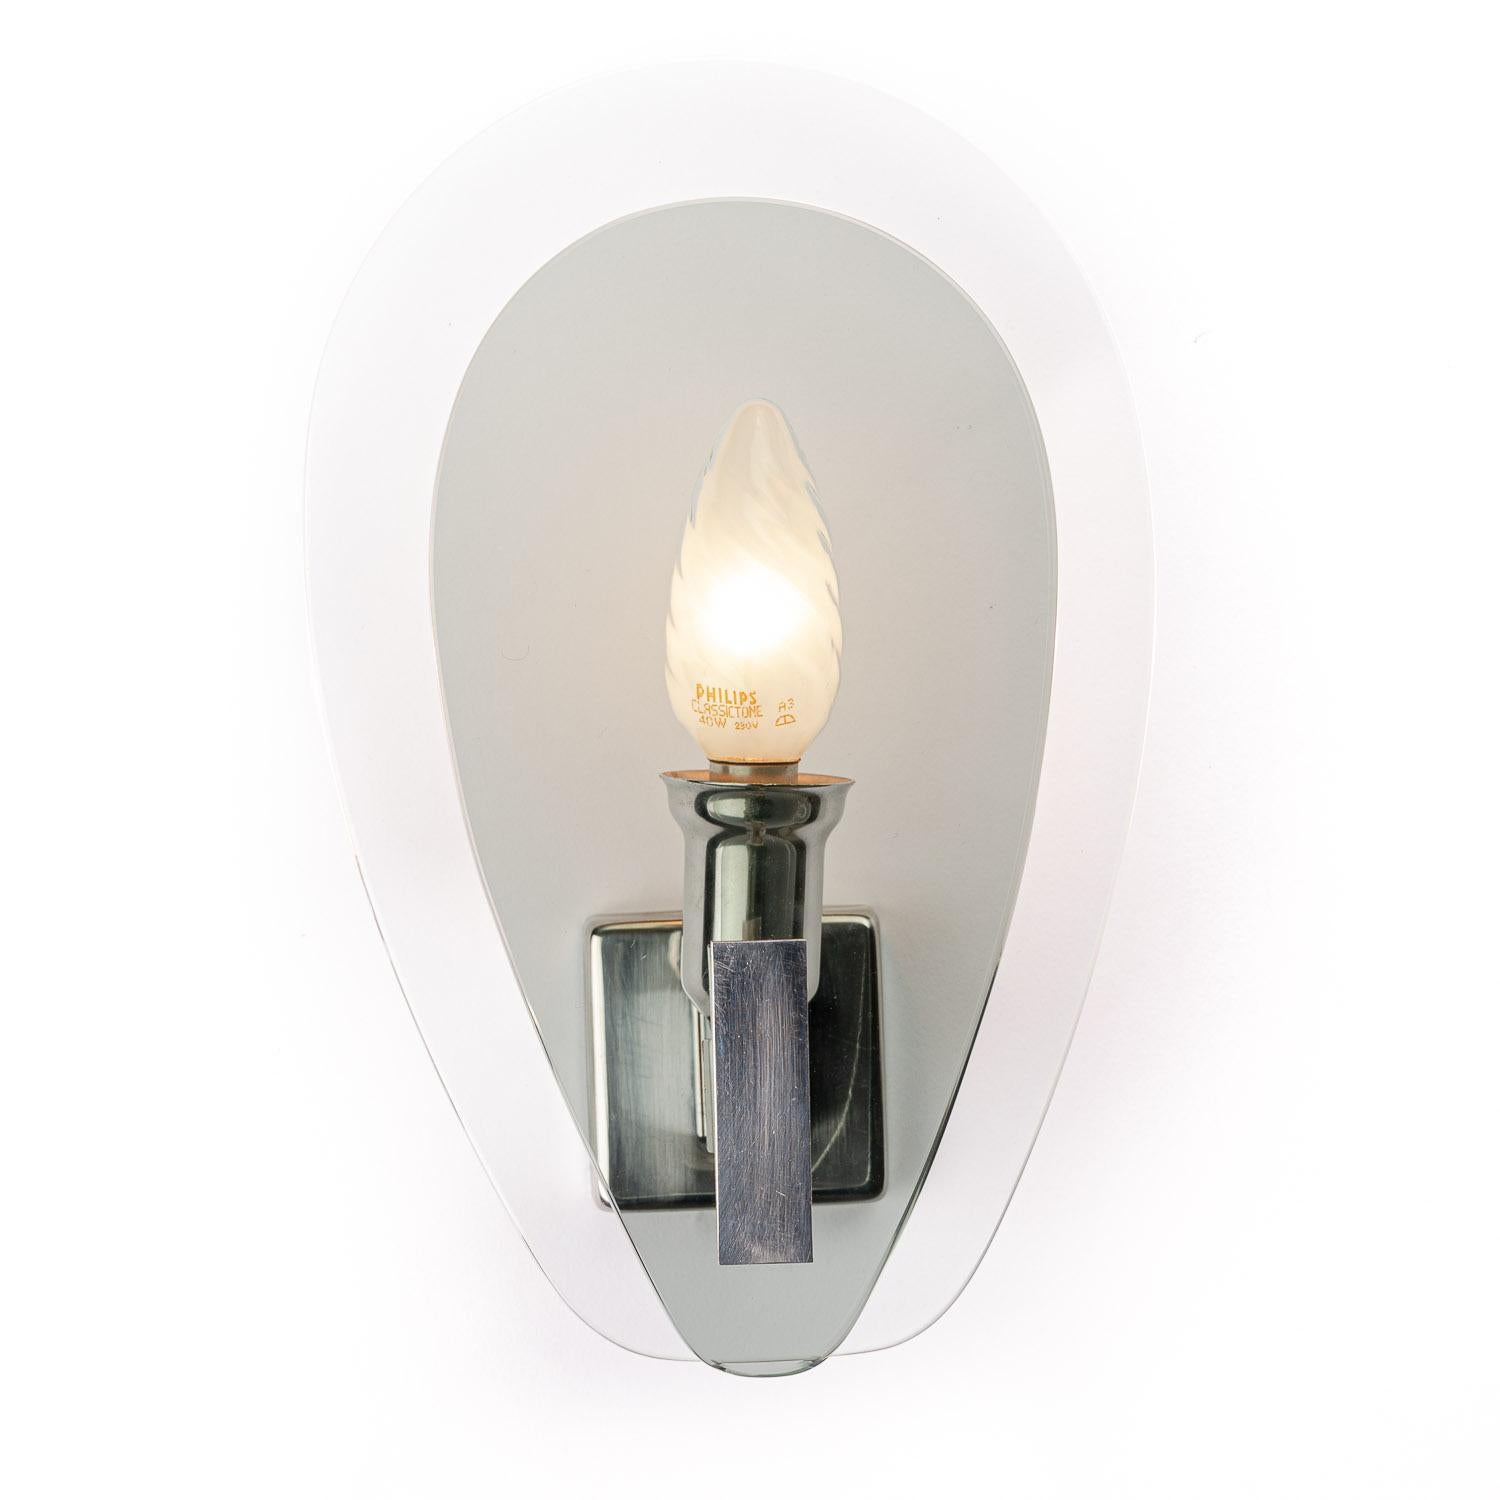 This is an elegant set of wall lights from the designer Veca in Italy has two glass plates with the smaller plate grey colored and larger plate is clear glass, in front of a single E14 bulb in a chrome frame.